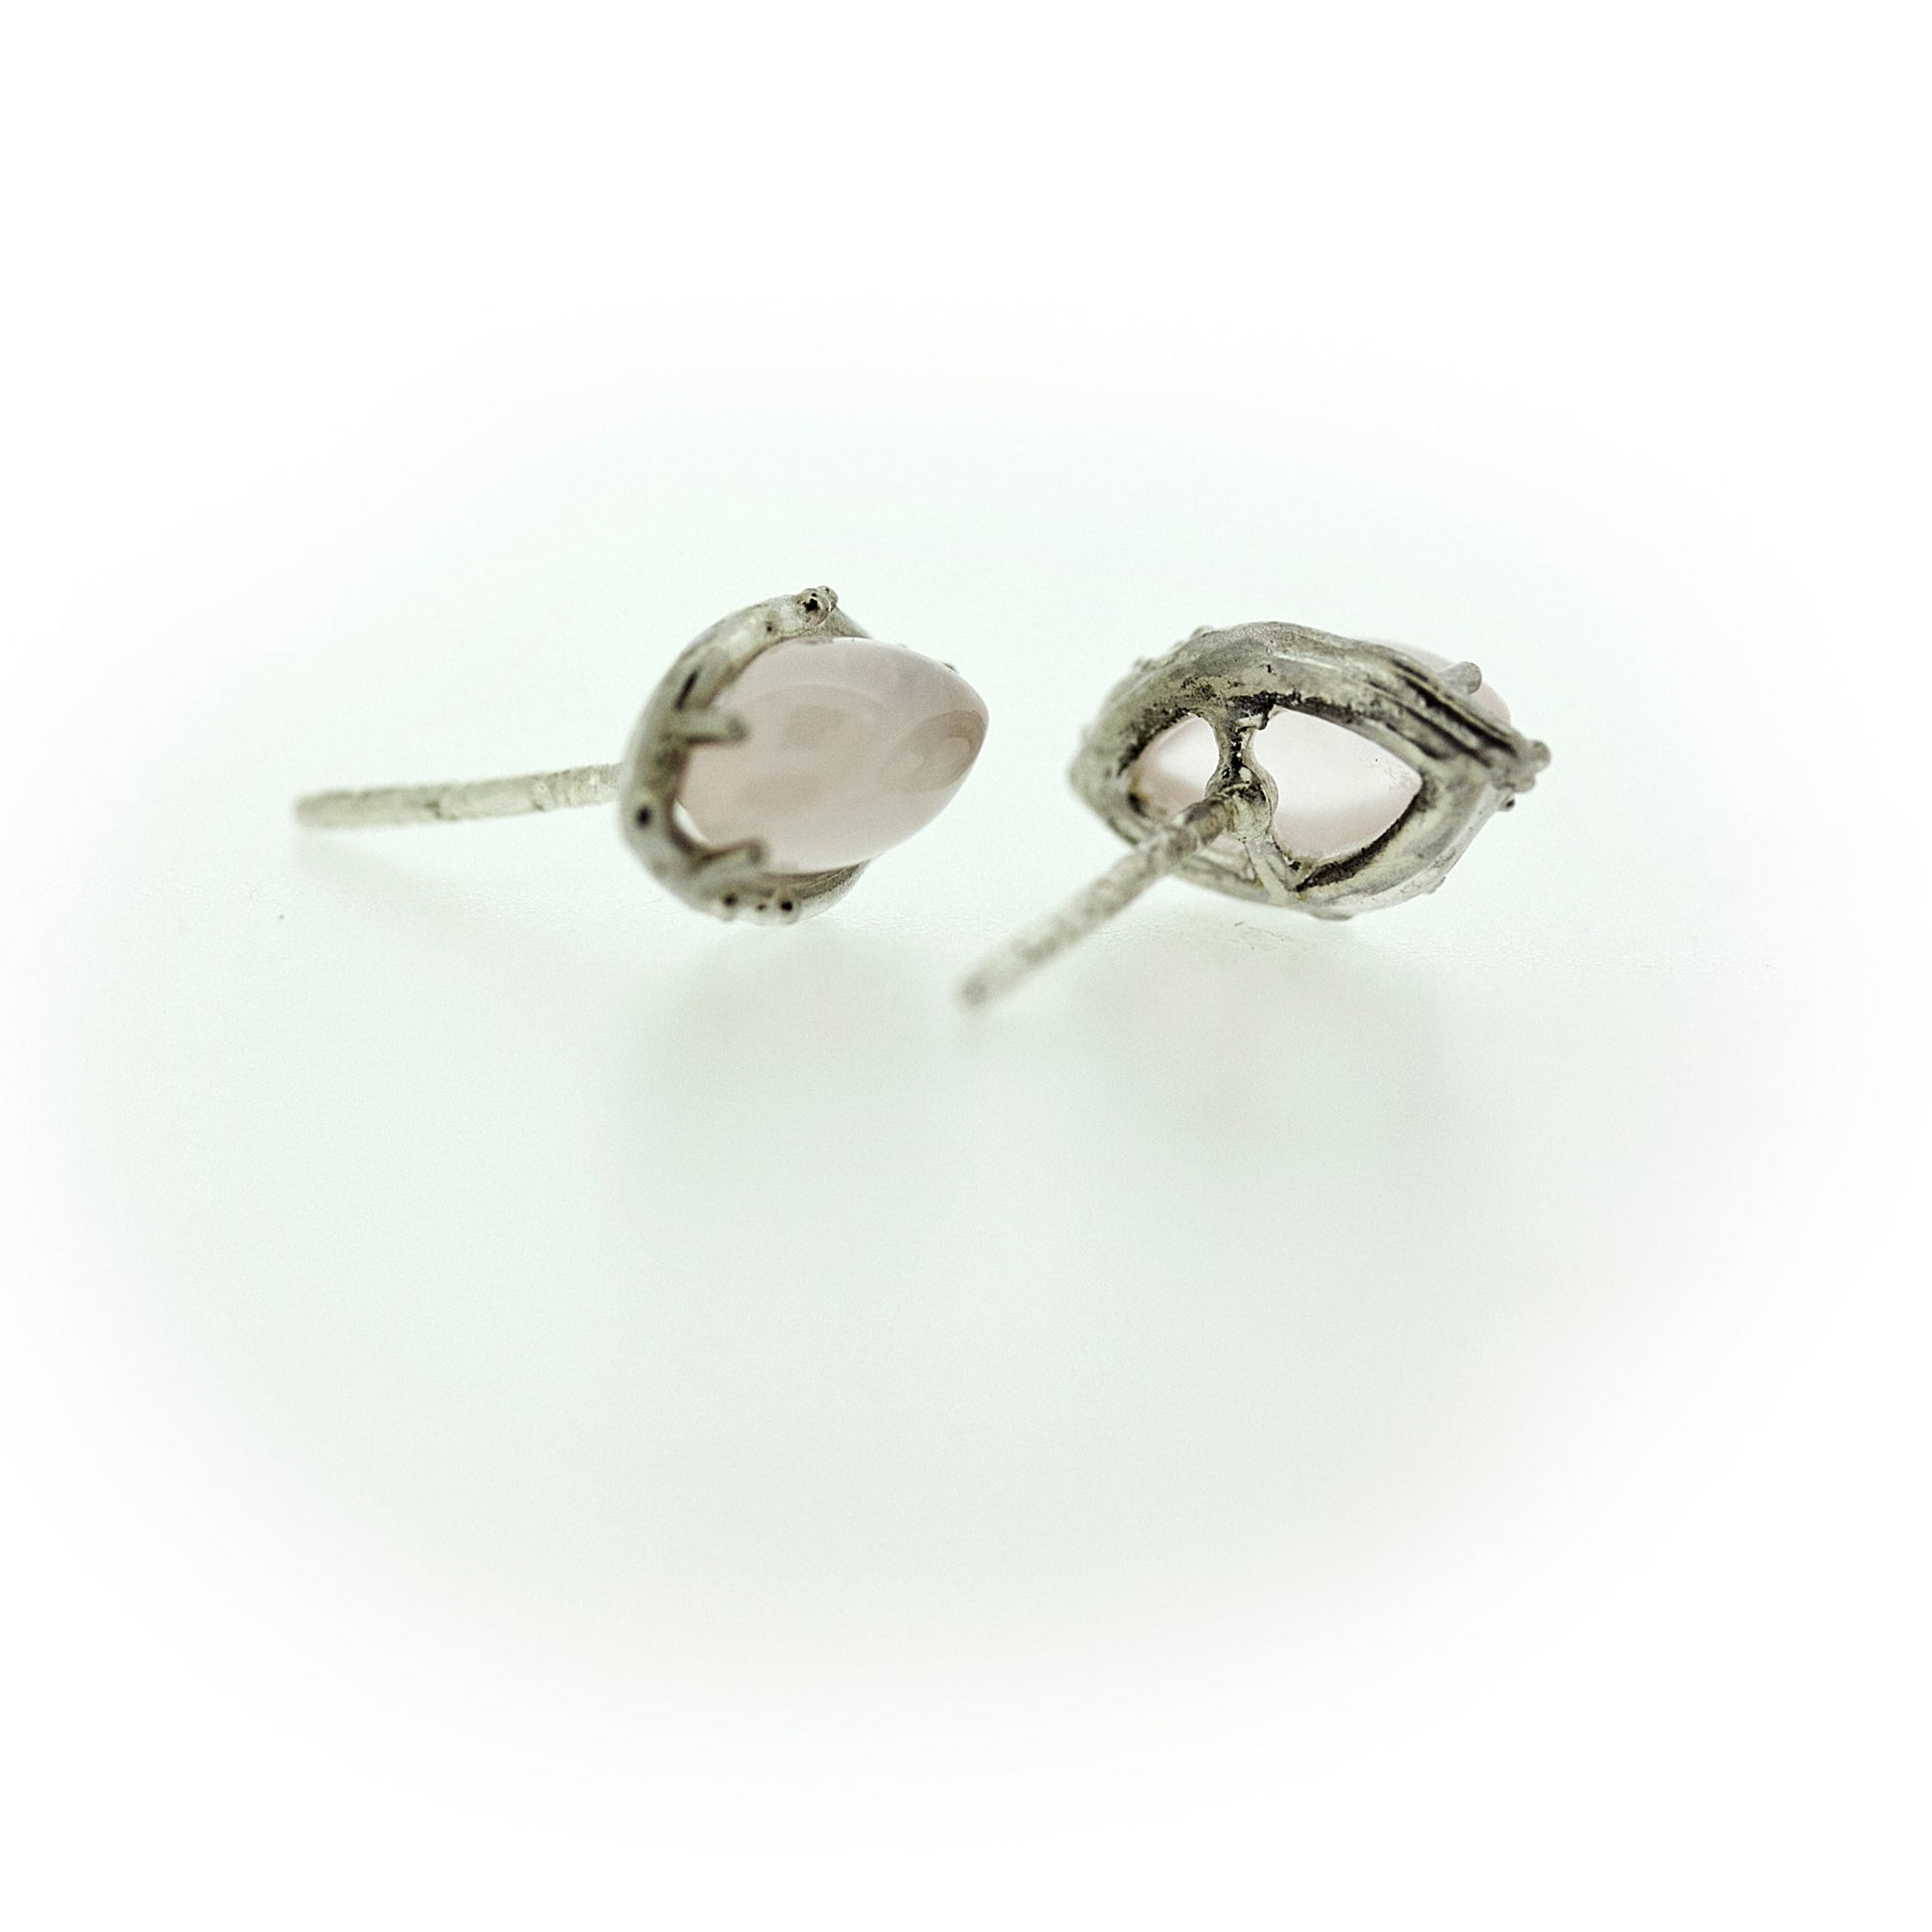 Back and side view of Rosa - Rose Quartz earrings.